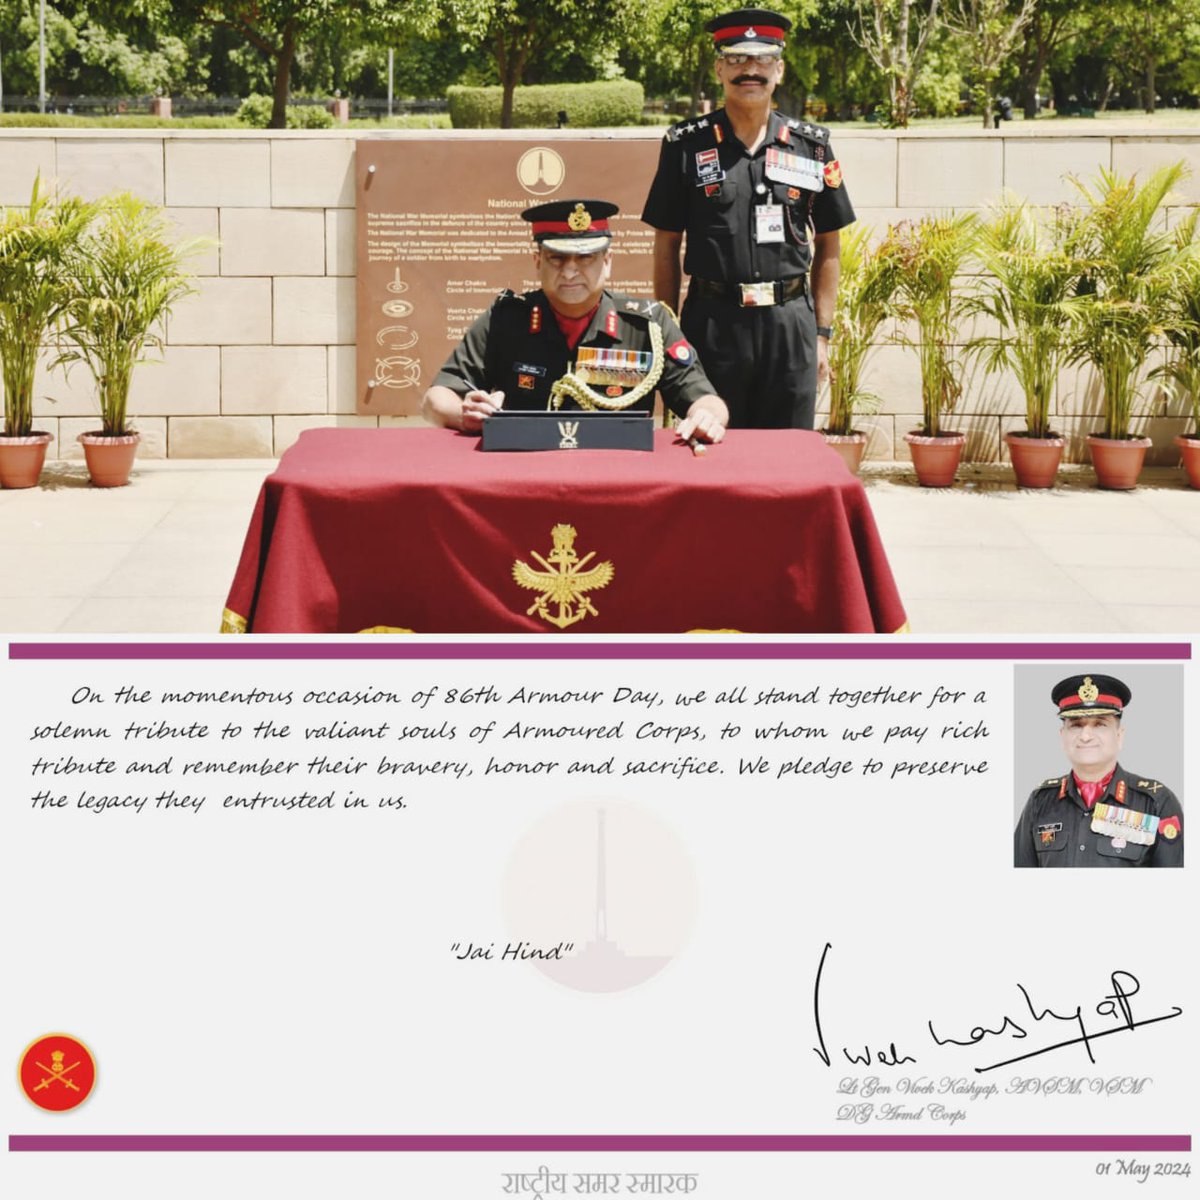 86th Armoured Corps Day was commemorated with honouring of fallen soldiers of #IndianArmedForces at #NationalWarMemorial in which Lt Gen Vivek Kashyap,AVSM,VSM,DG Armd Corps and Gen offrs of the Corps laid wreath and paid homage at #AmarJawanJyoti in a solemn ceremony at NWM.